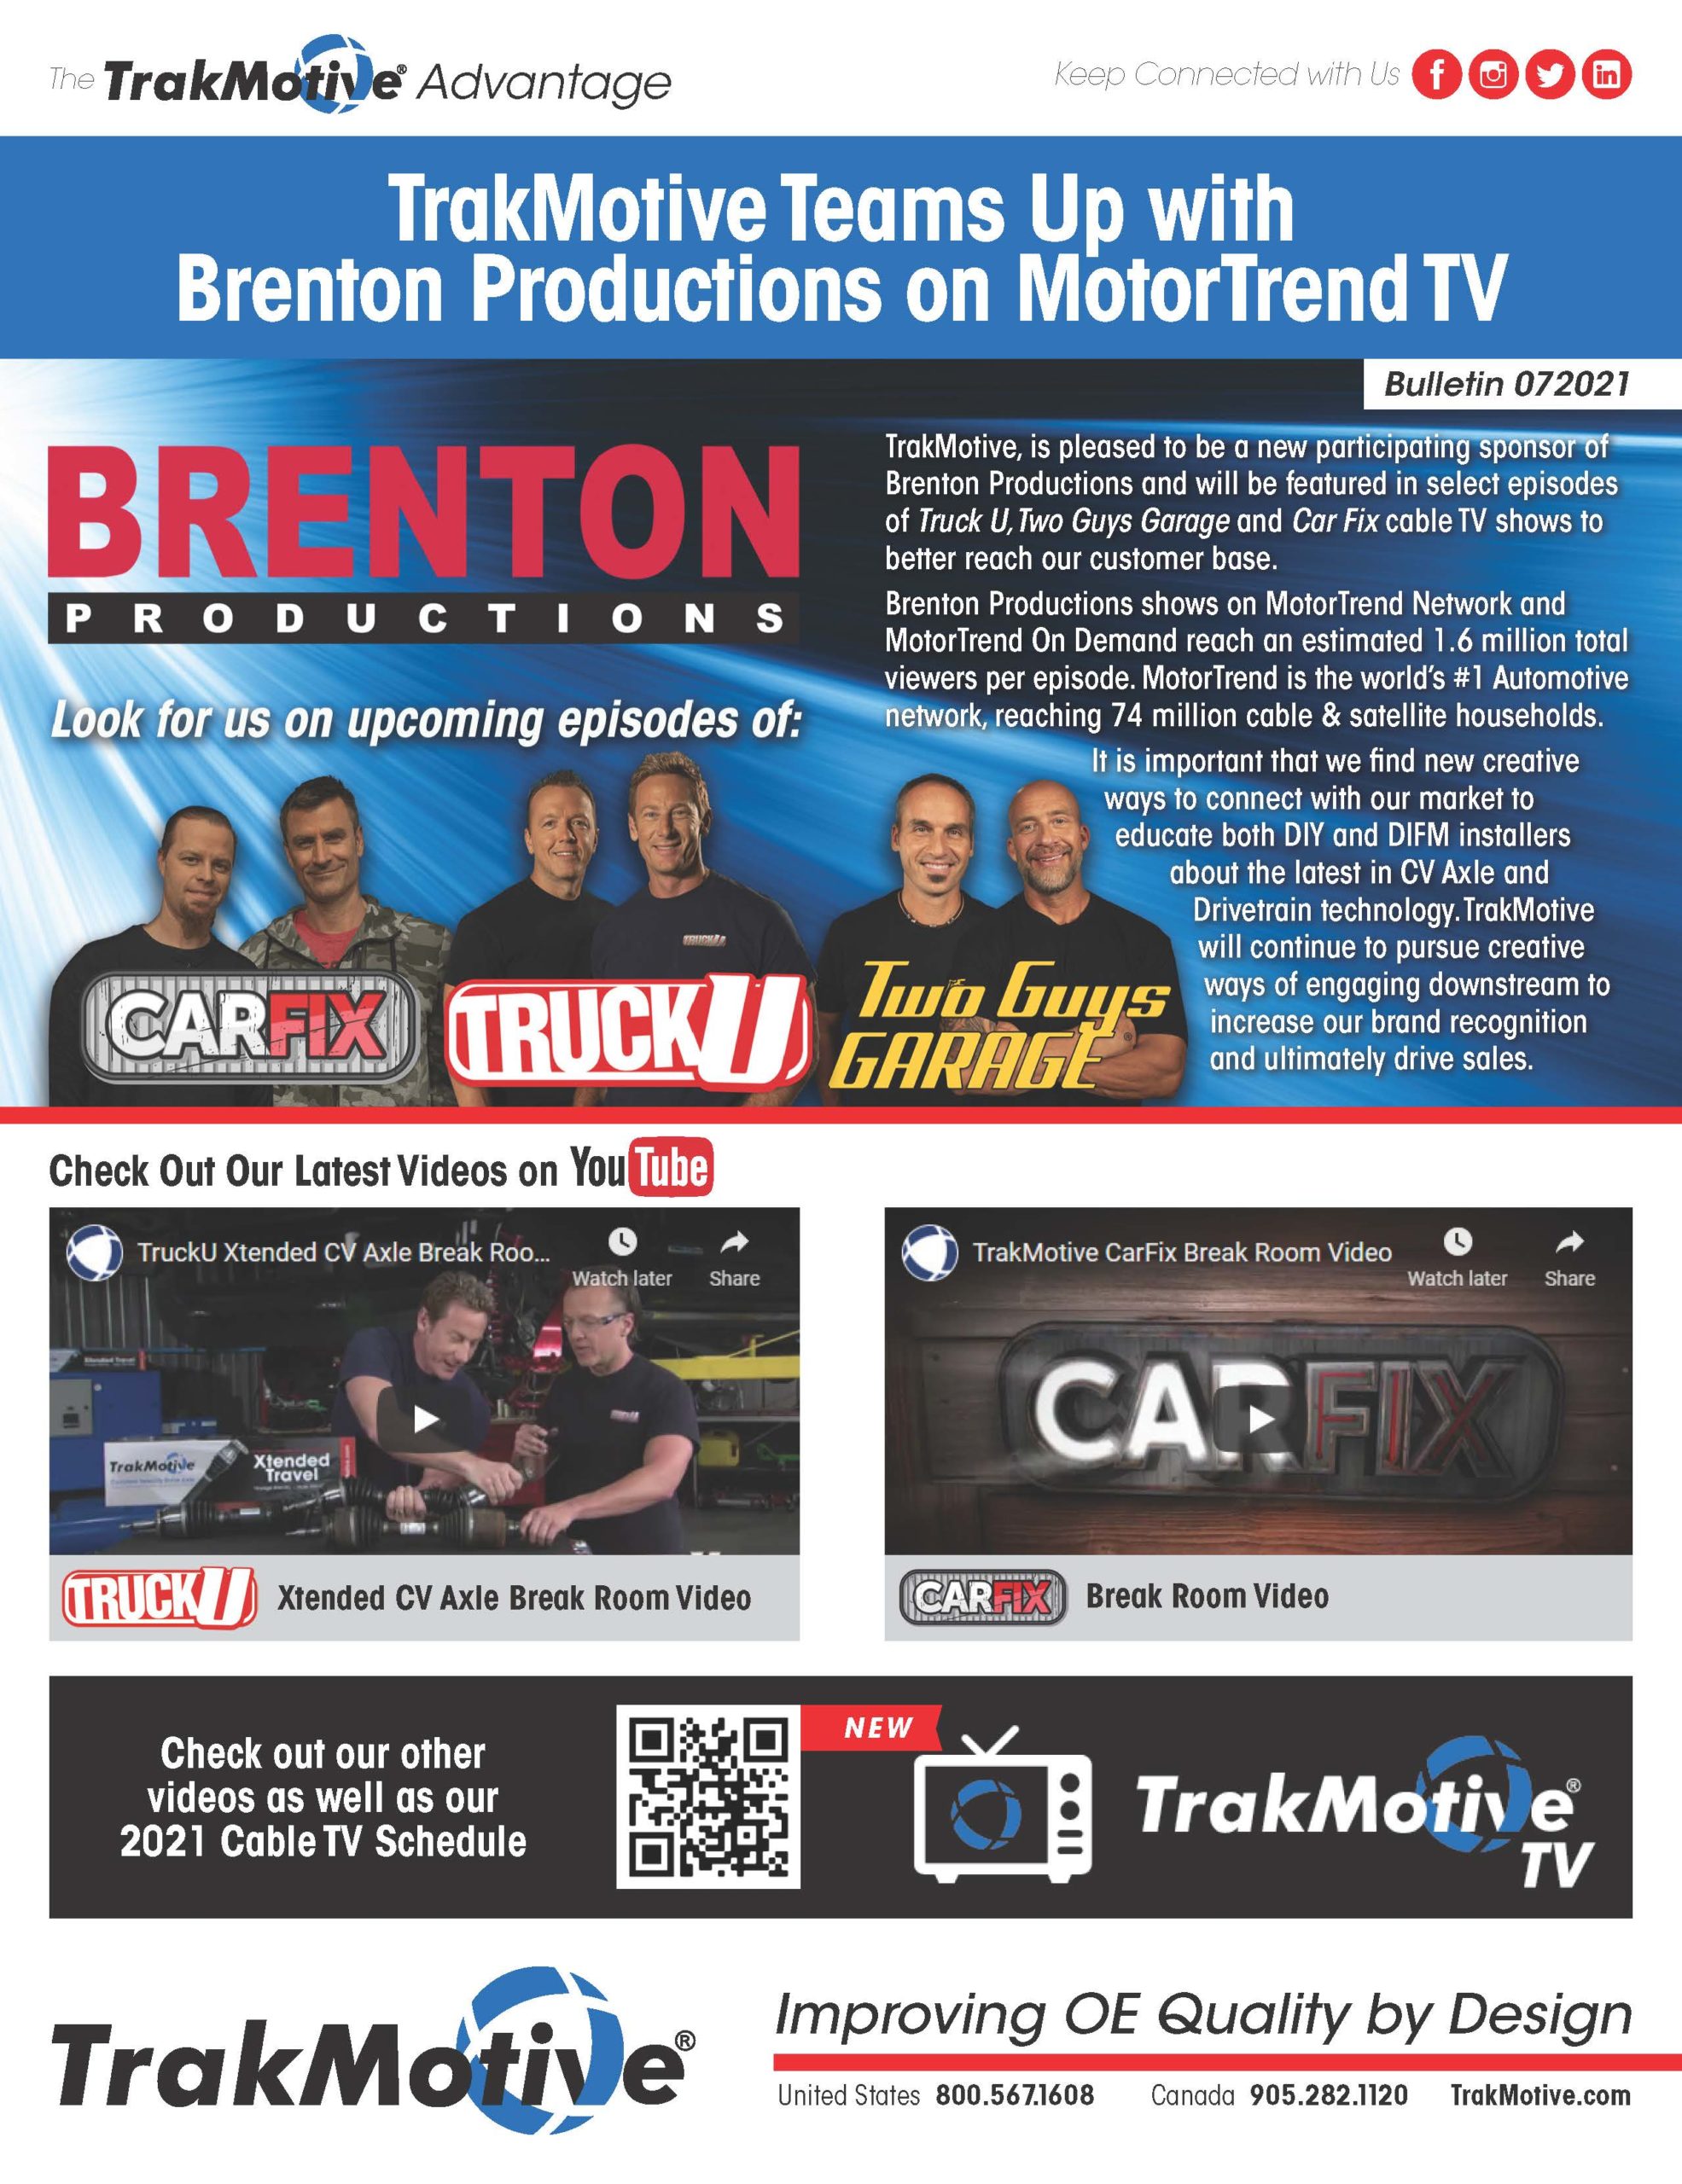 07/2021: TrakMotive Teams Up With Brenton Productions on MotorTrend TV